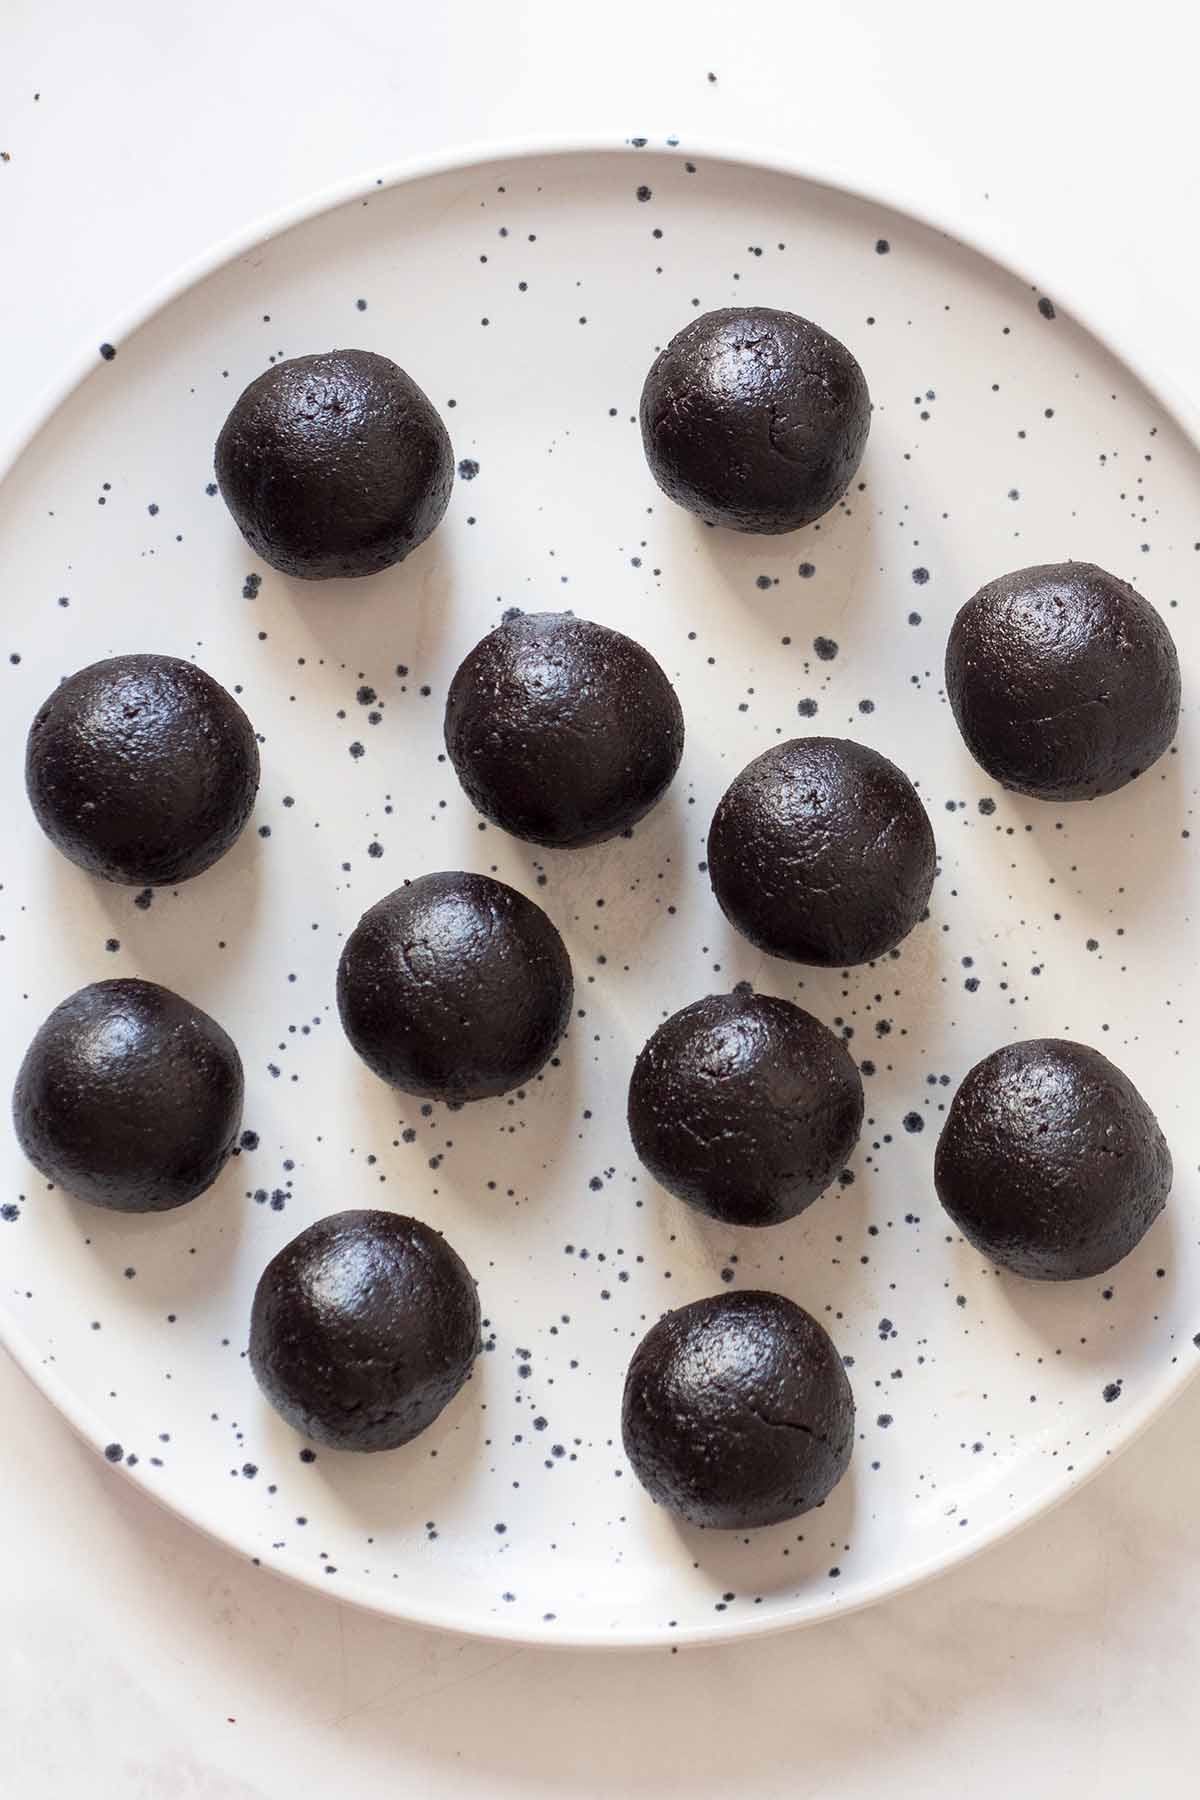 uncoated oreo truffles on plate